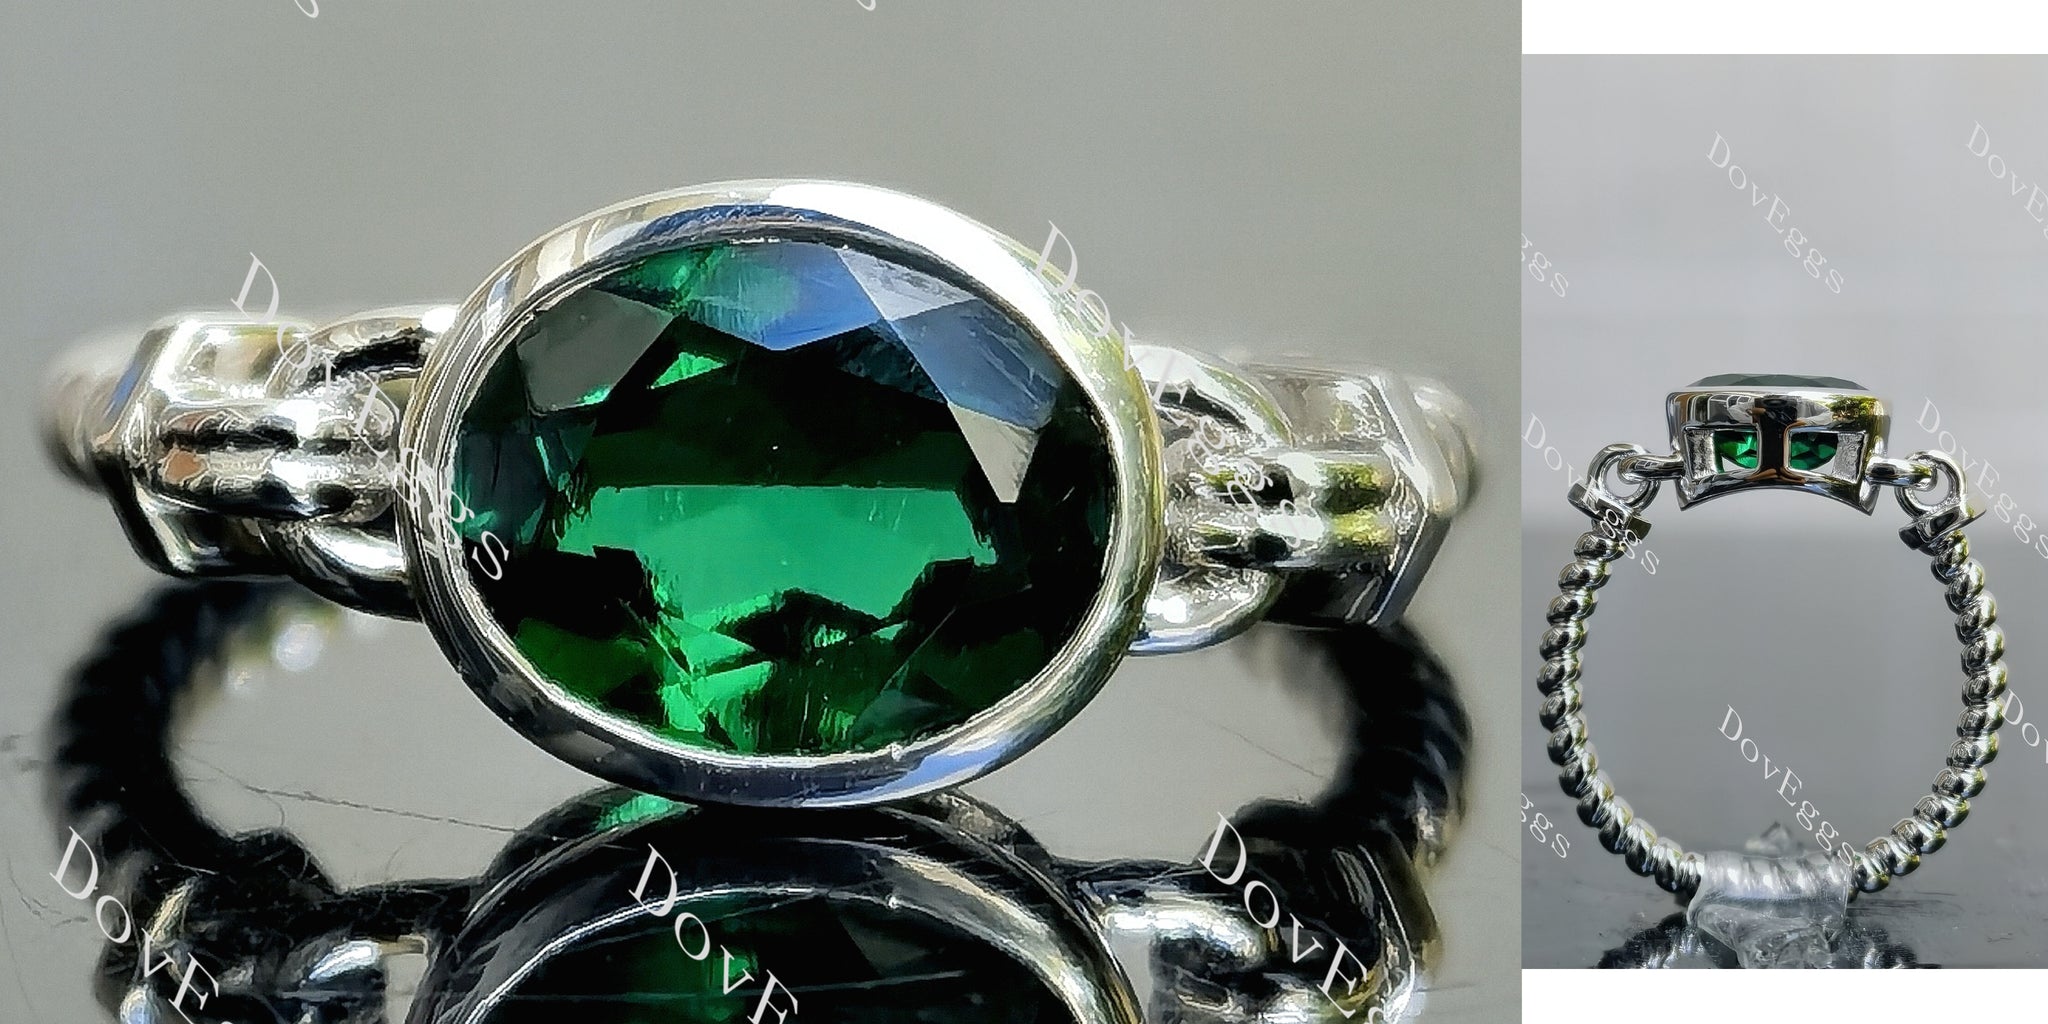 solitaire bezel zambia emerald coclored gem engagement ring